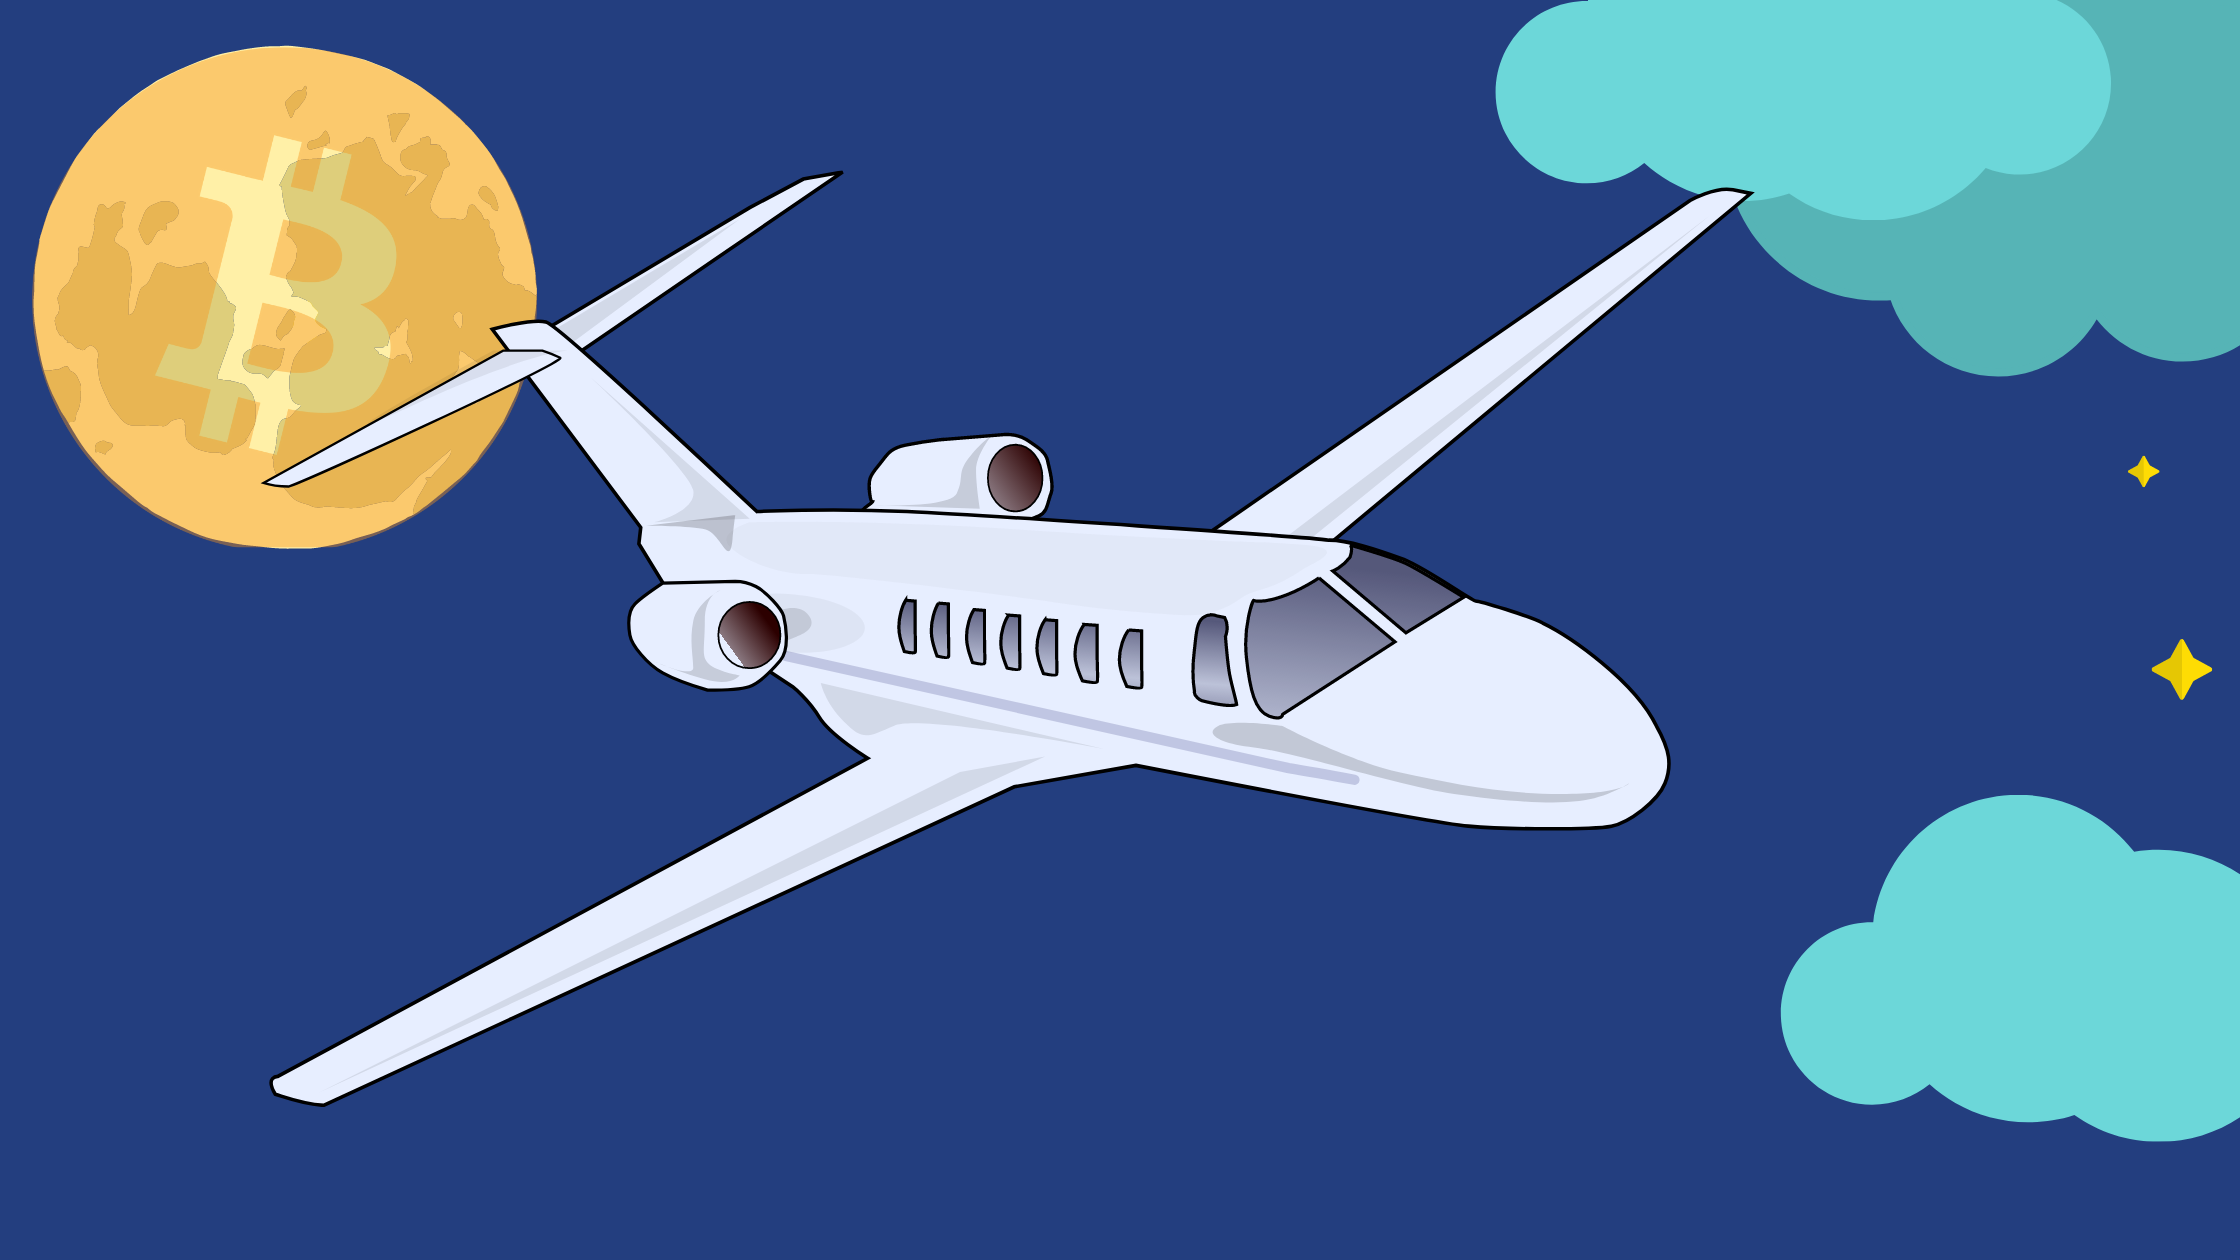 Charter a Private Plane with Bitcoin